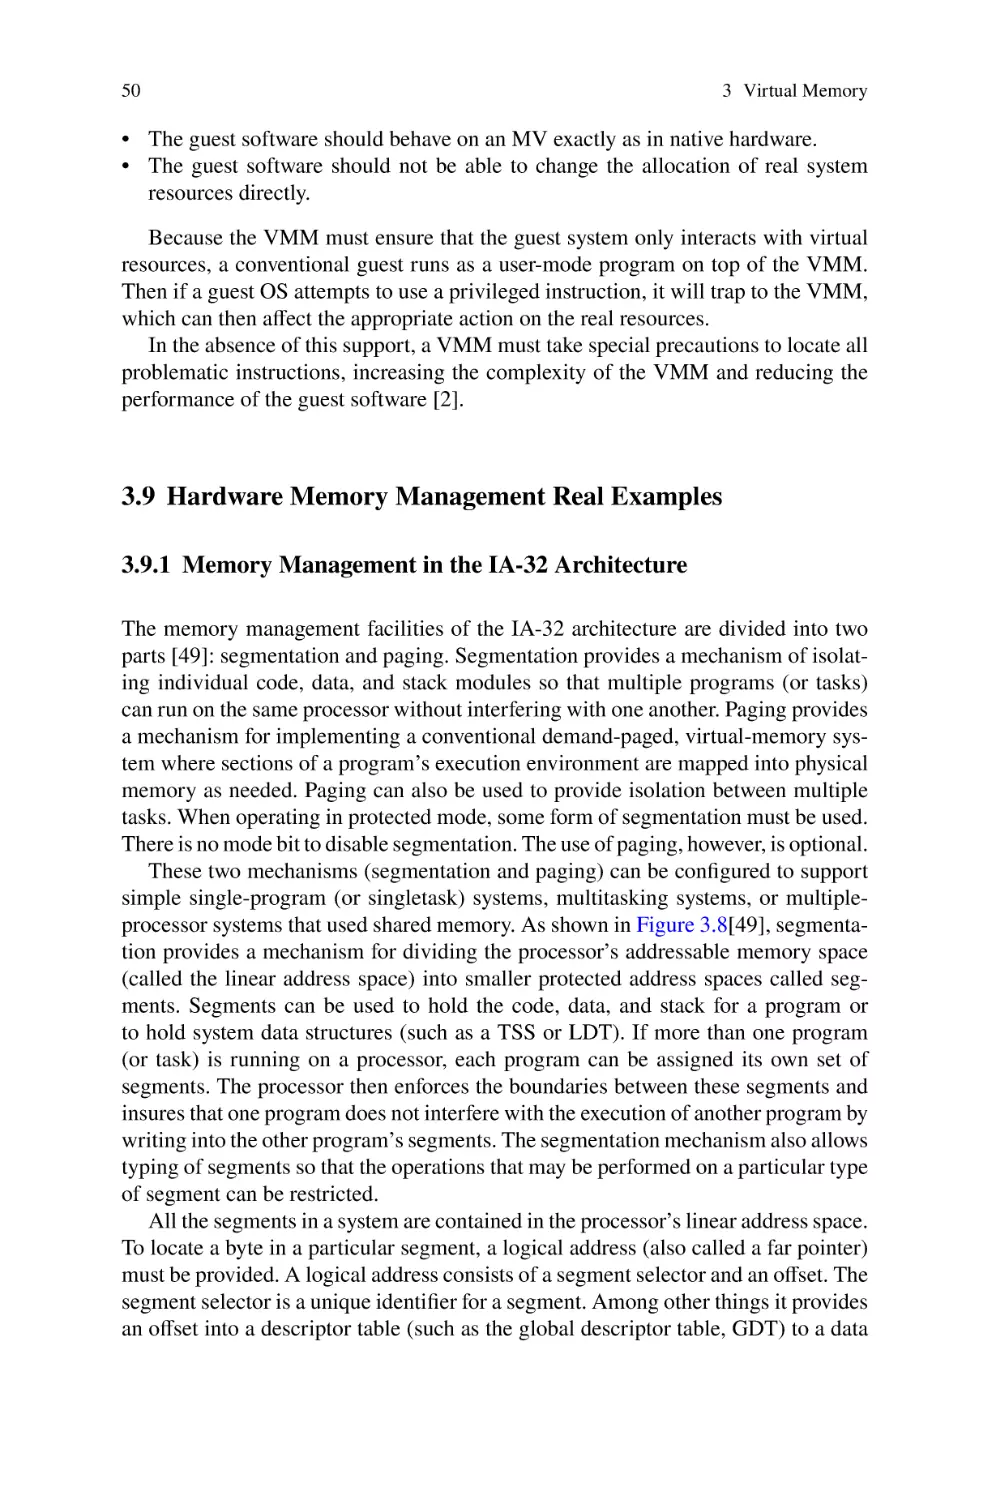 3.9 Hardware Memory Management Real Examples
3.9.1 Memory Management in the IA-32 Architecture